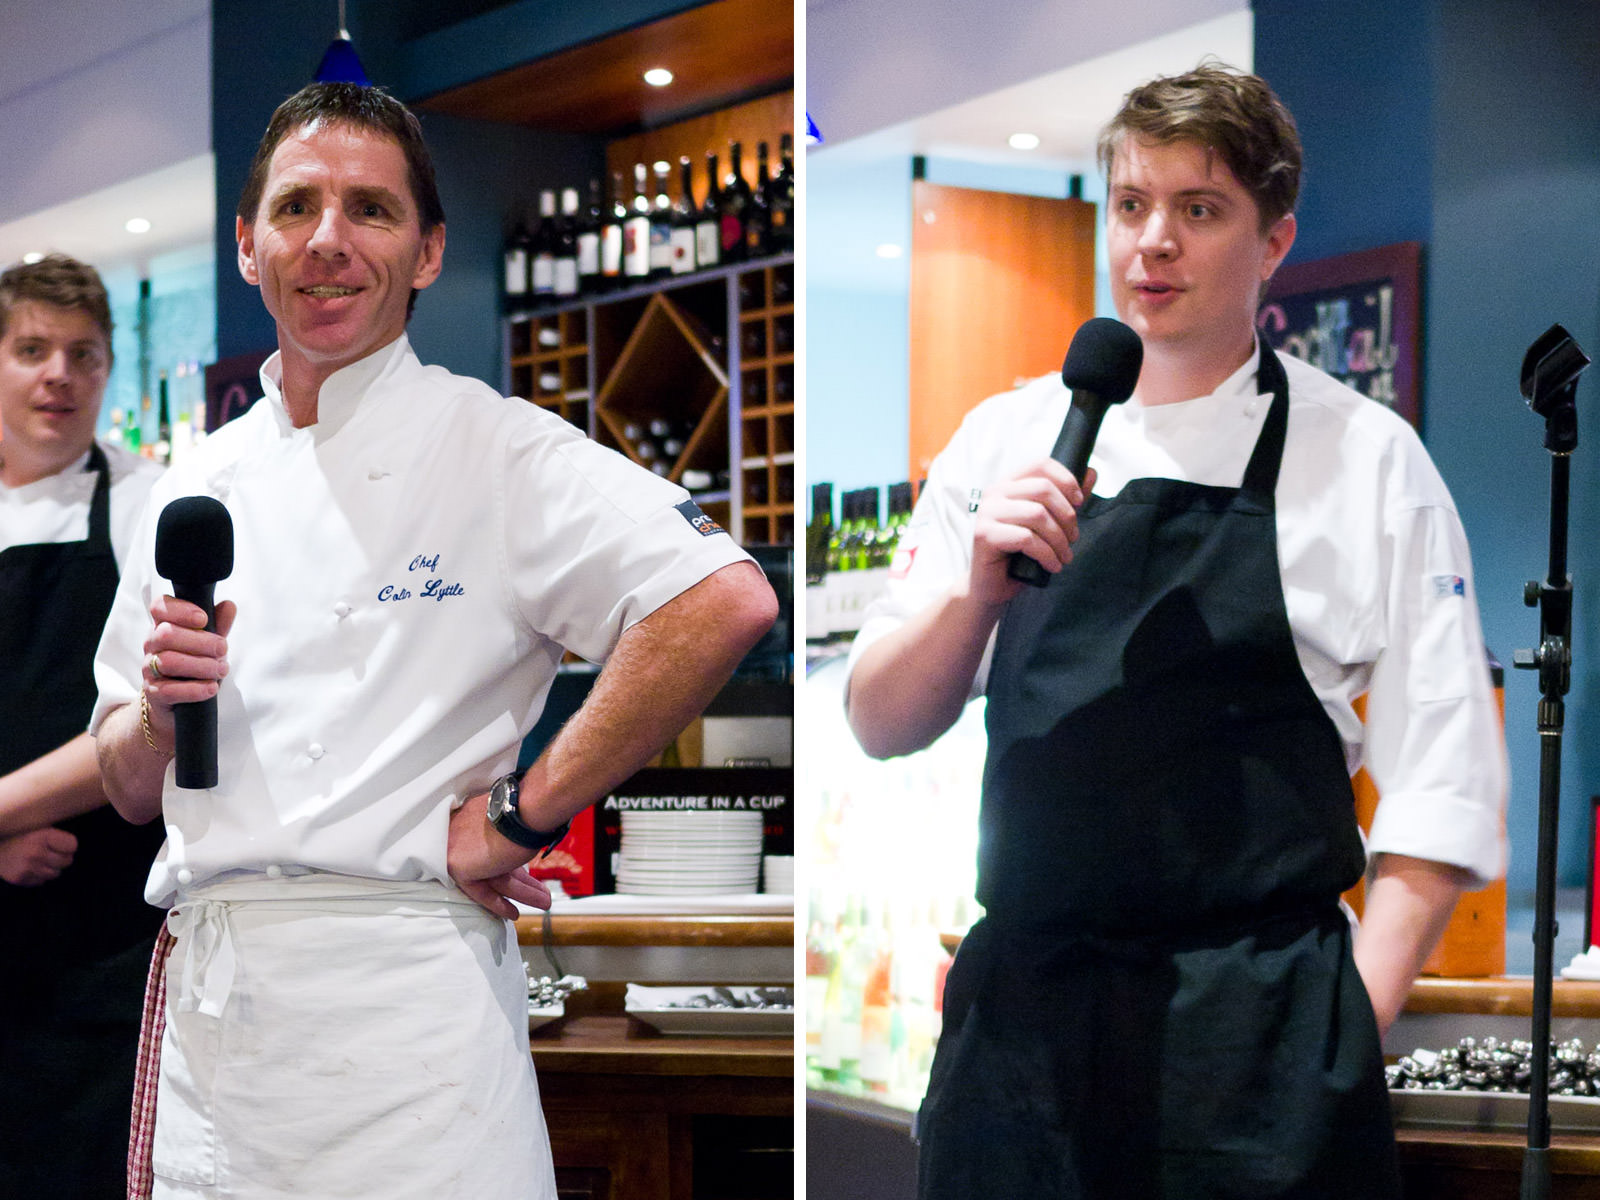 L-R: Chefs Colin Lyttle and Richard Ousby introduce the meal